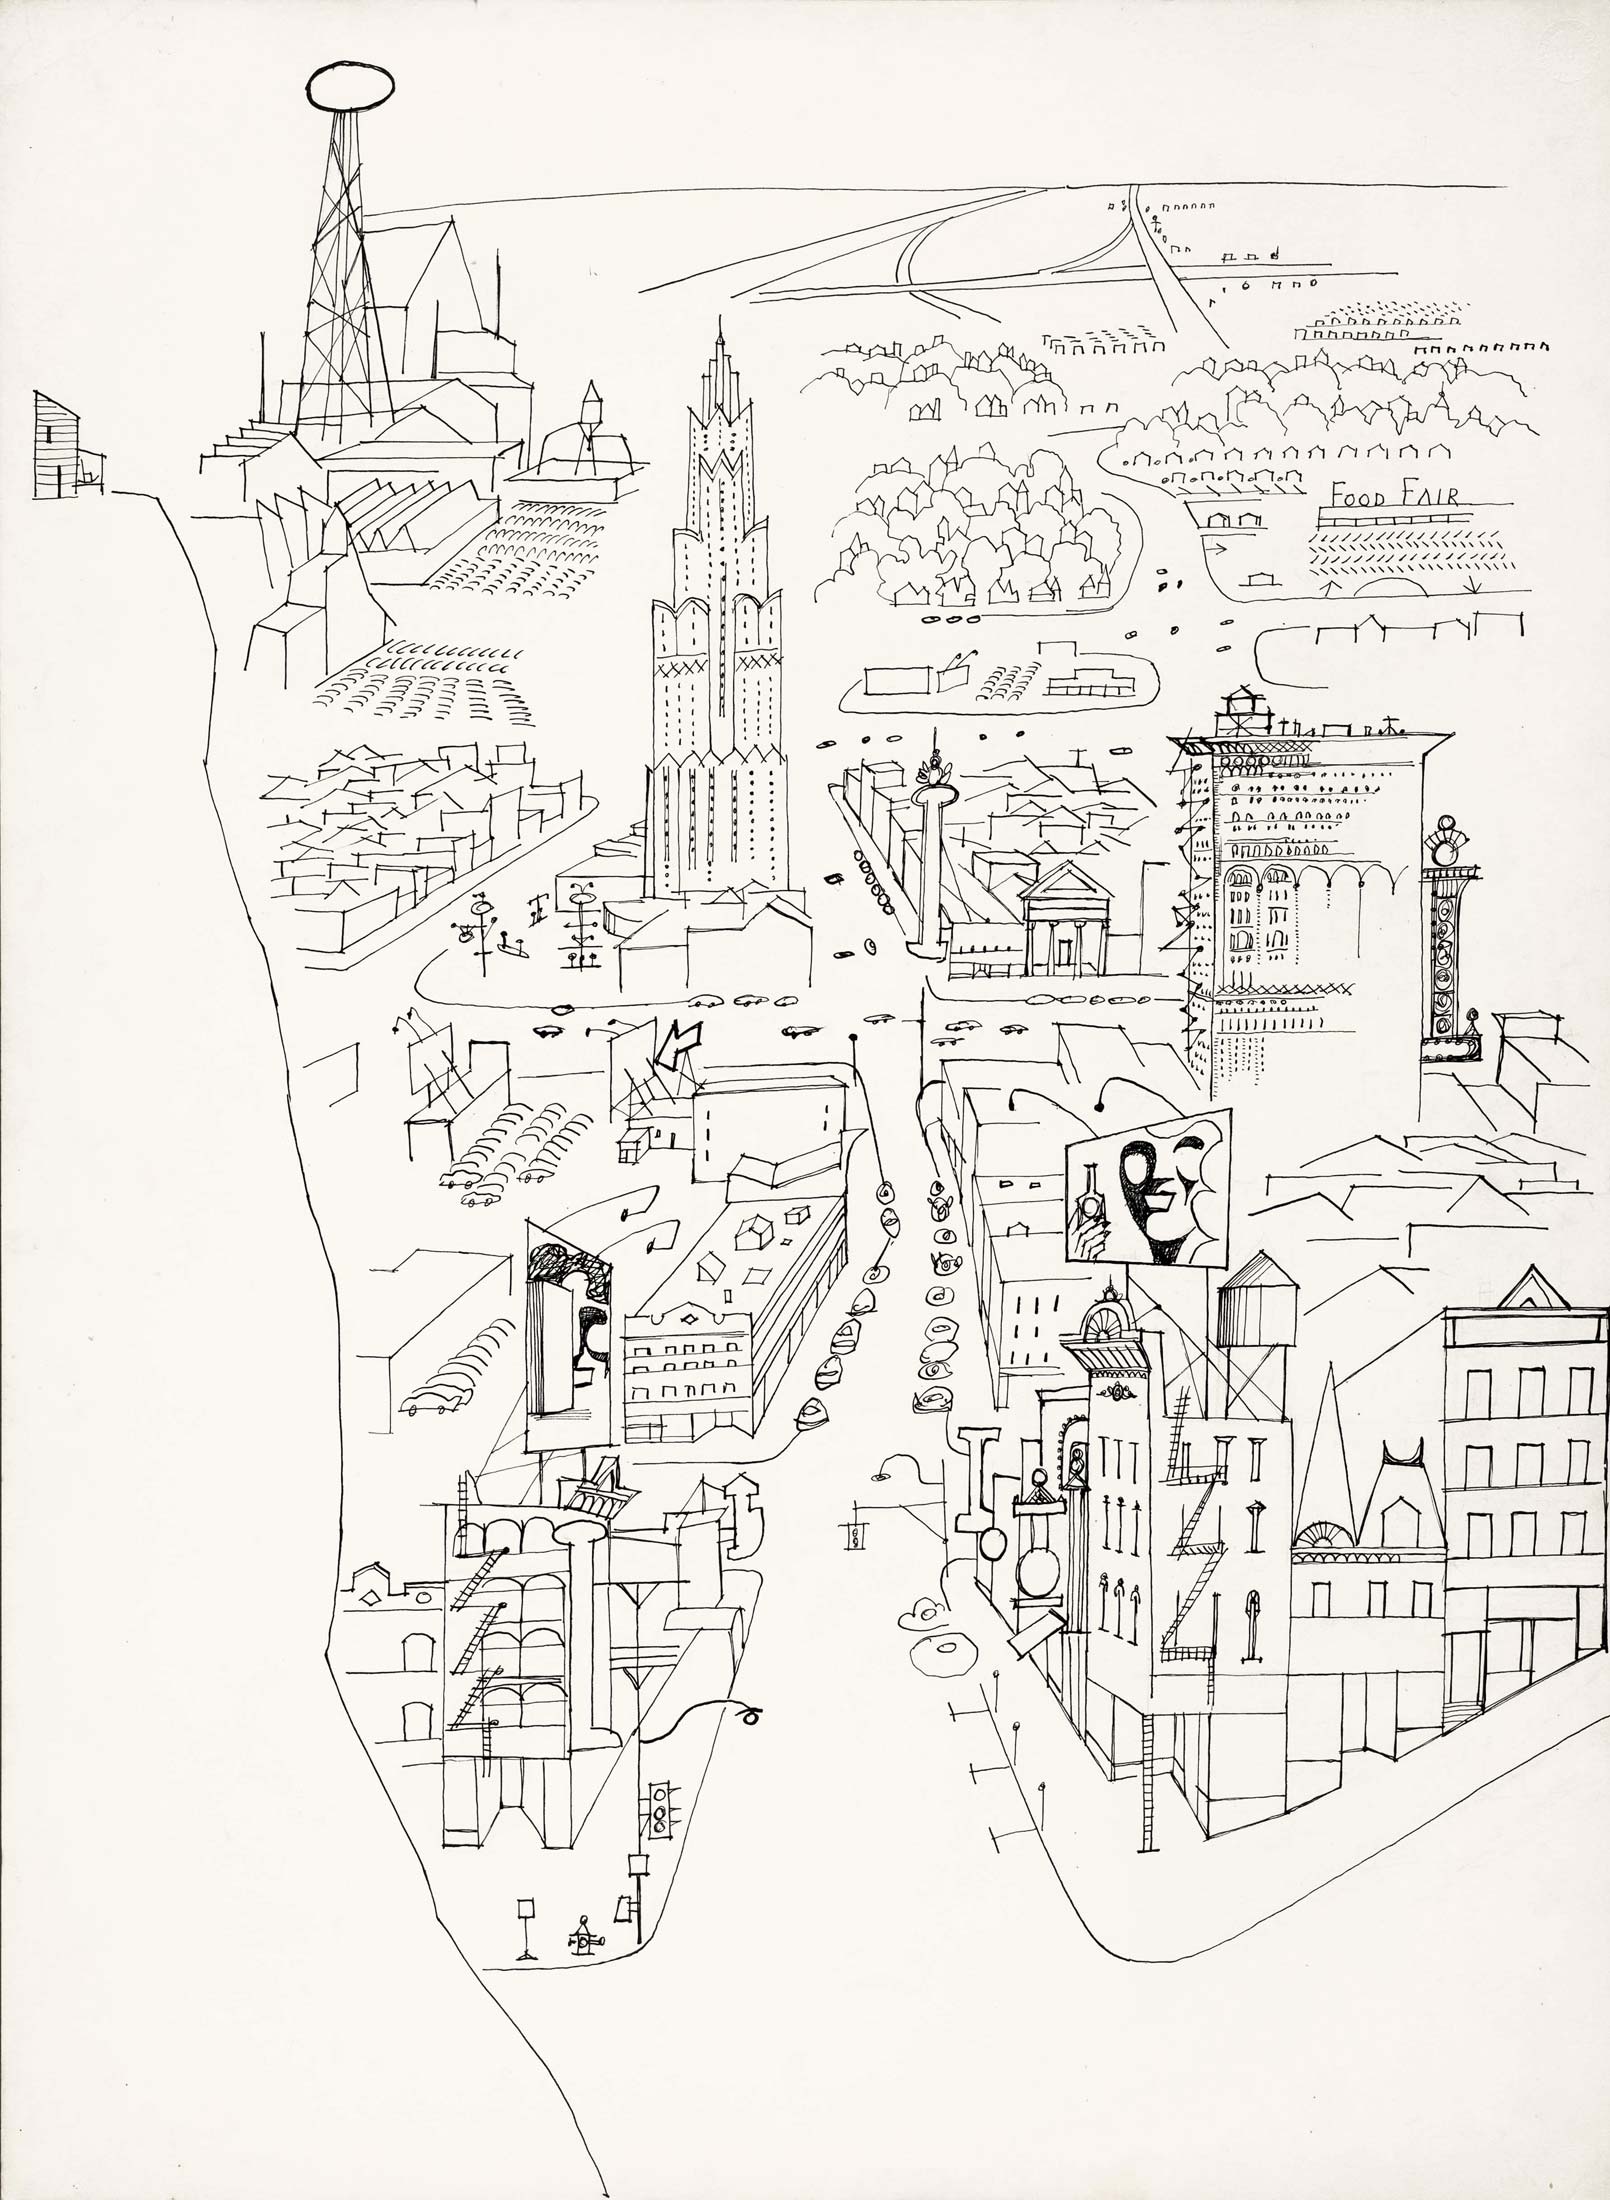 <em>Small Town with Small Town Skyscraper</em>, 1958. Drawing for background of <em>The Road—South and West</em>, from <em>The Americans</em>. Ink on paper, 30 x 22 in. Centre Pompidou, Paris; Gift of The Saul Steinberg Foundation.